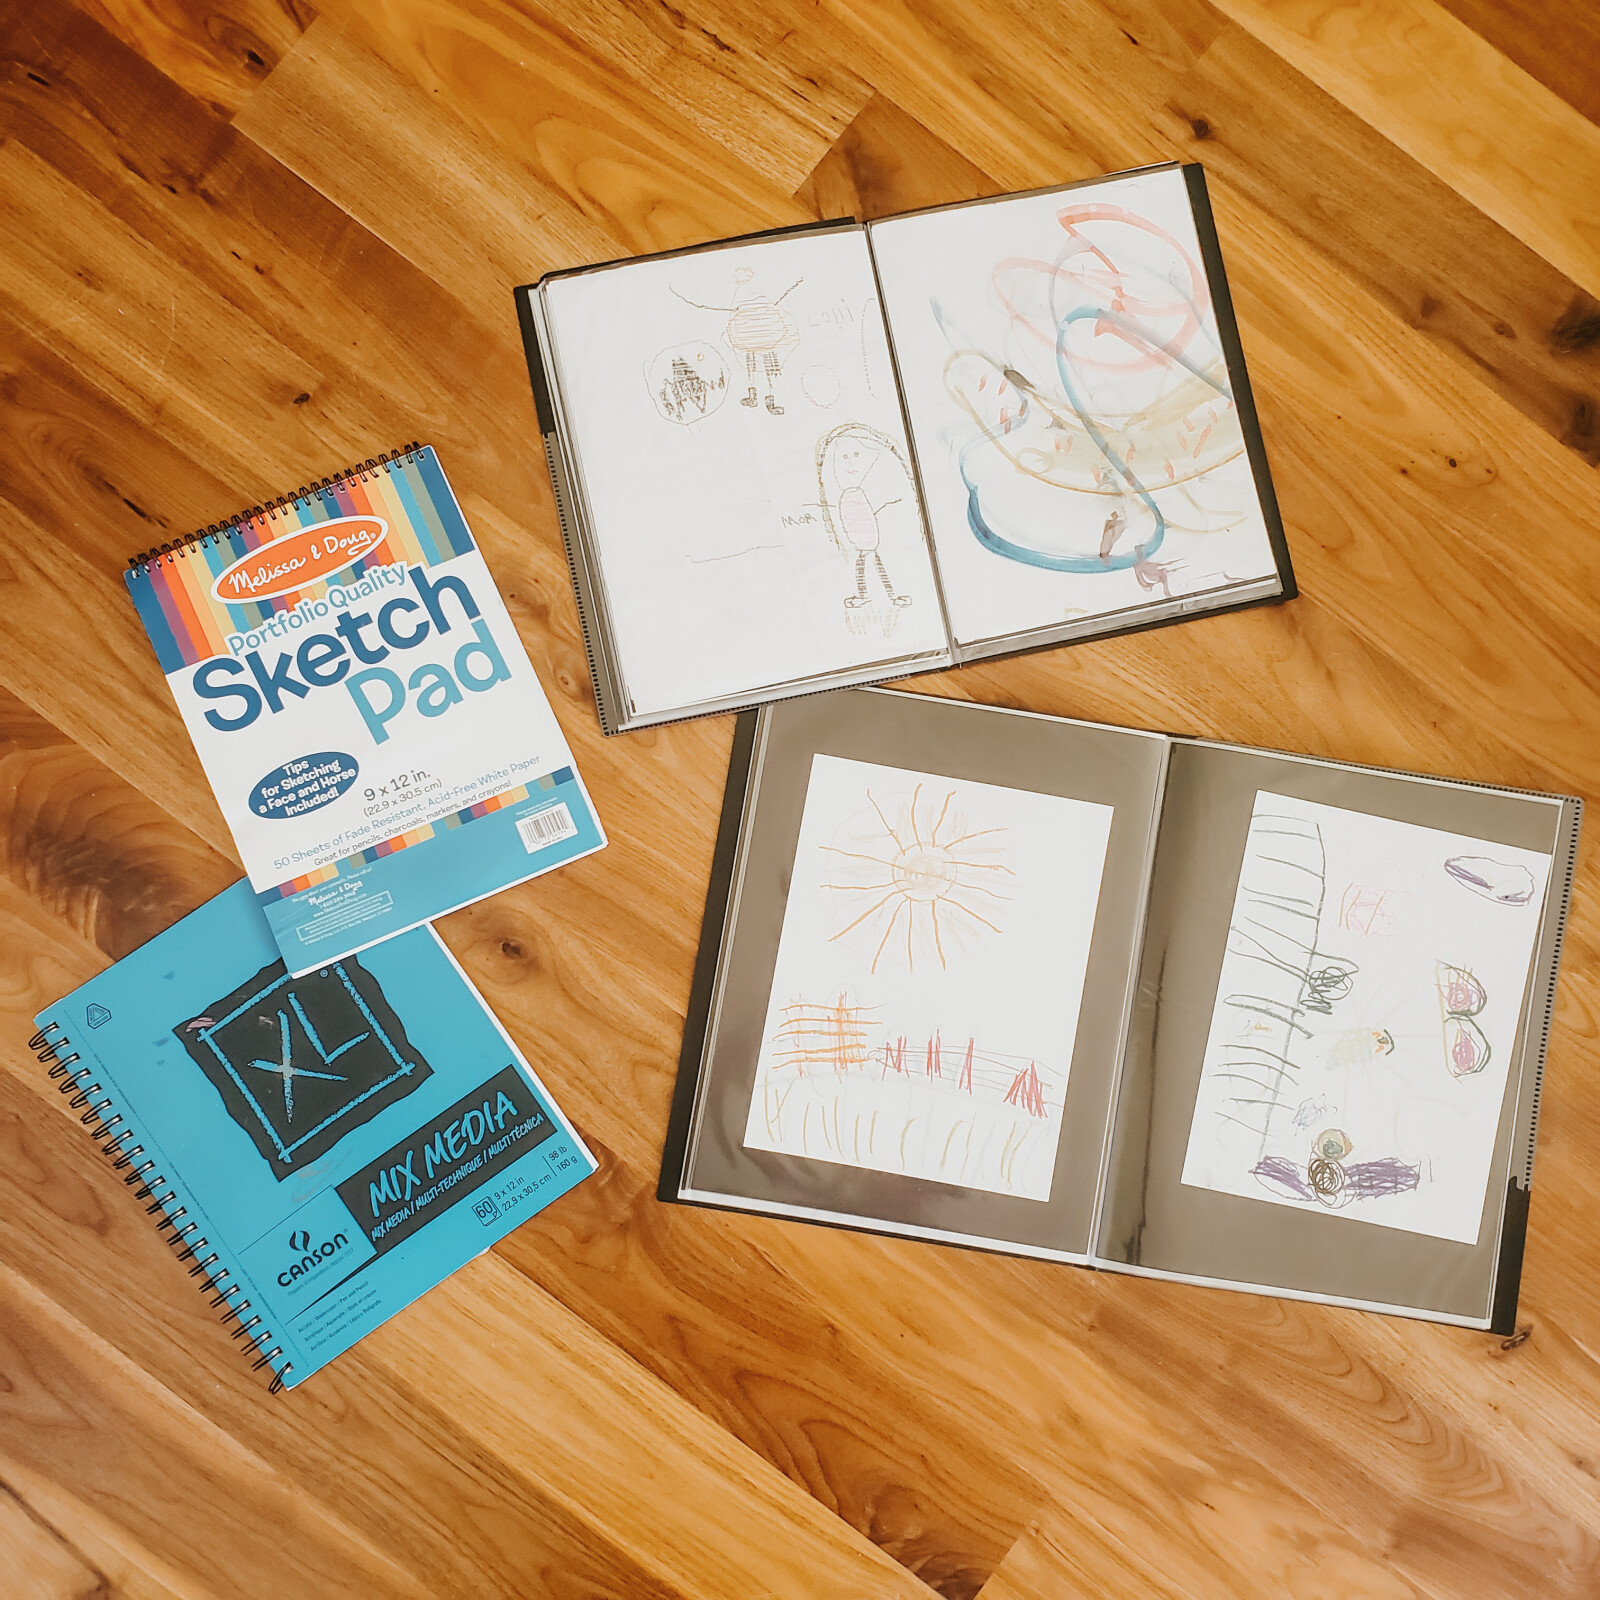 Children's Art and How to Store It